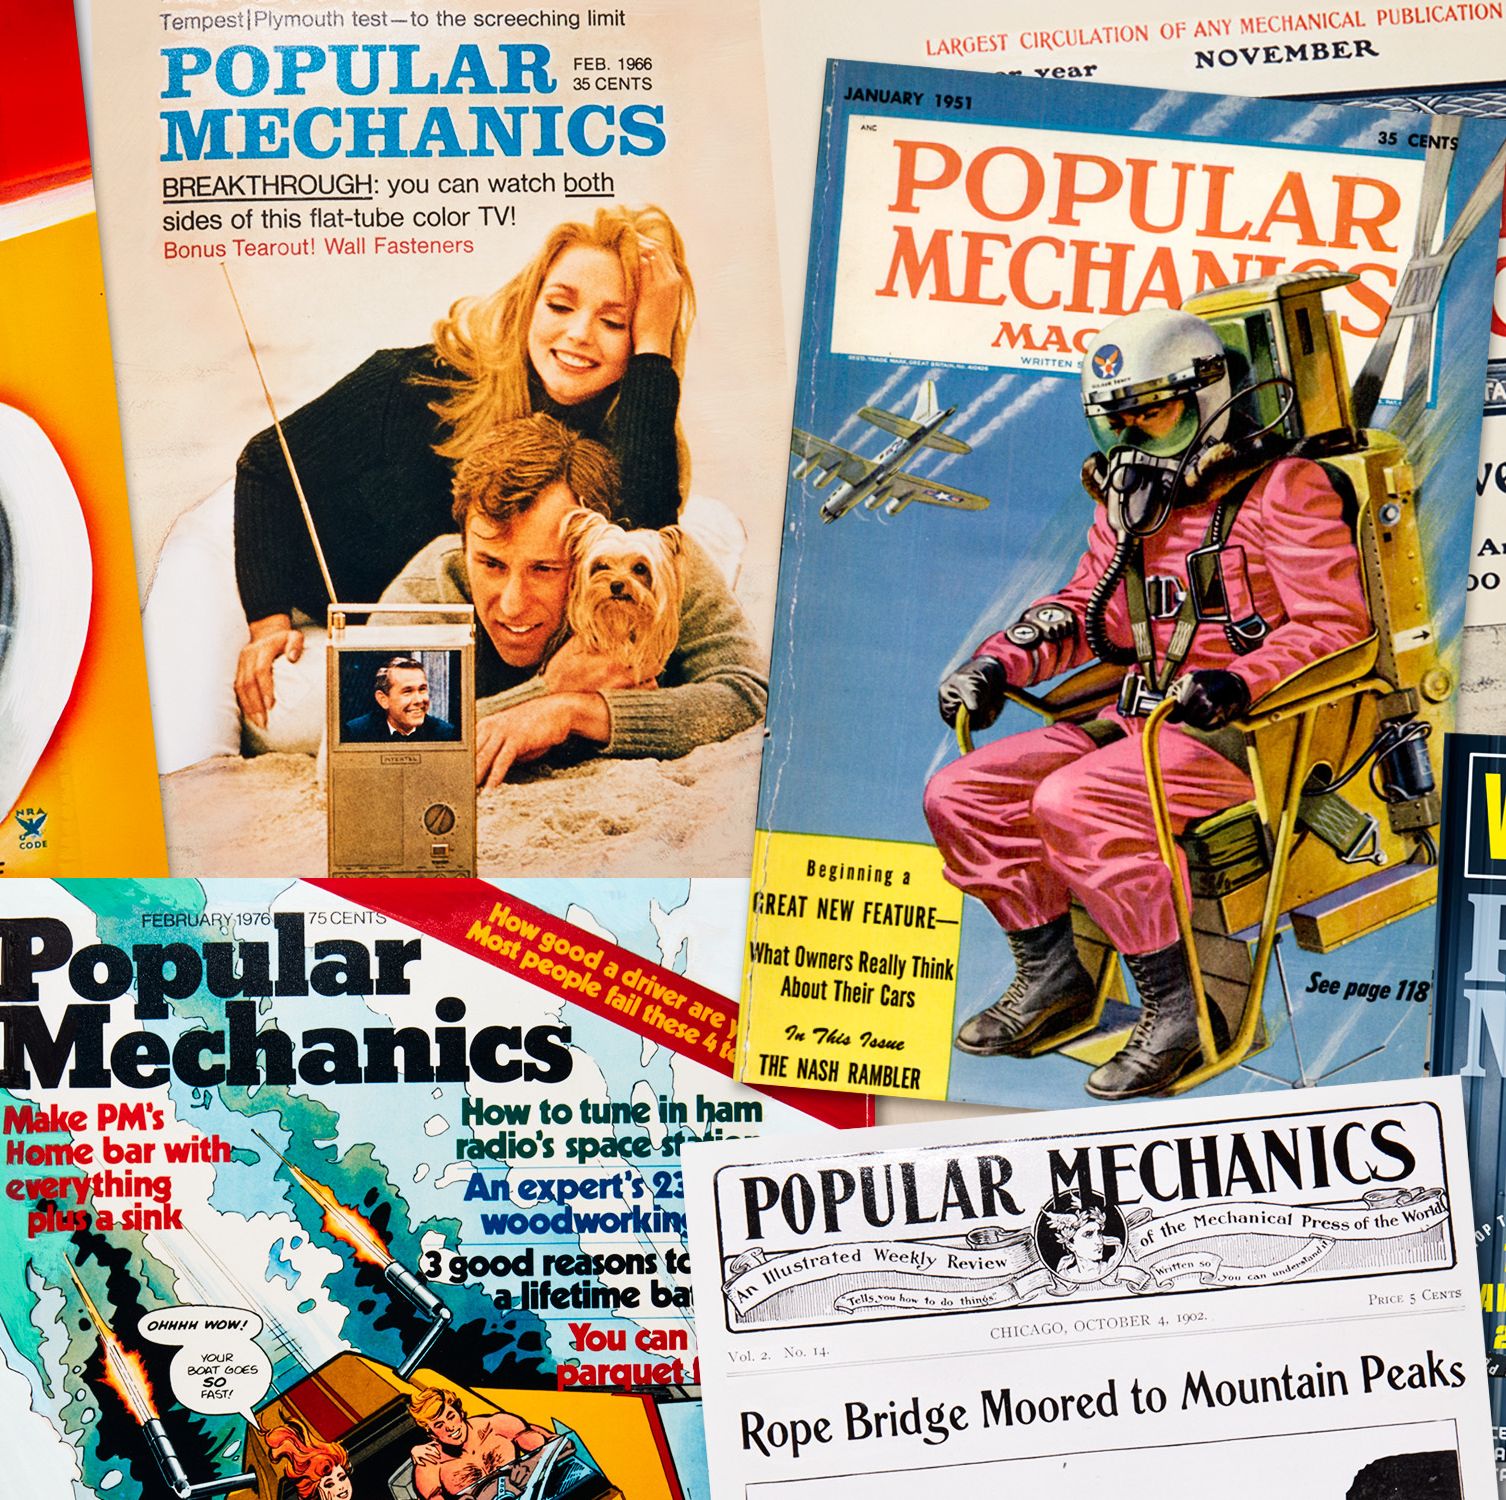 The Best Stories from 120 Years of Popular Mechanics